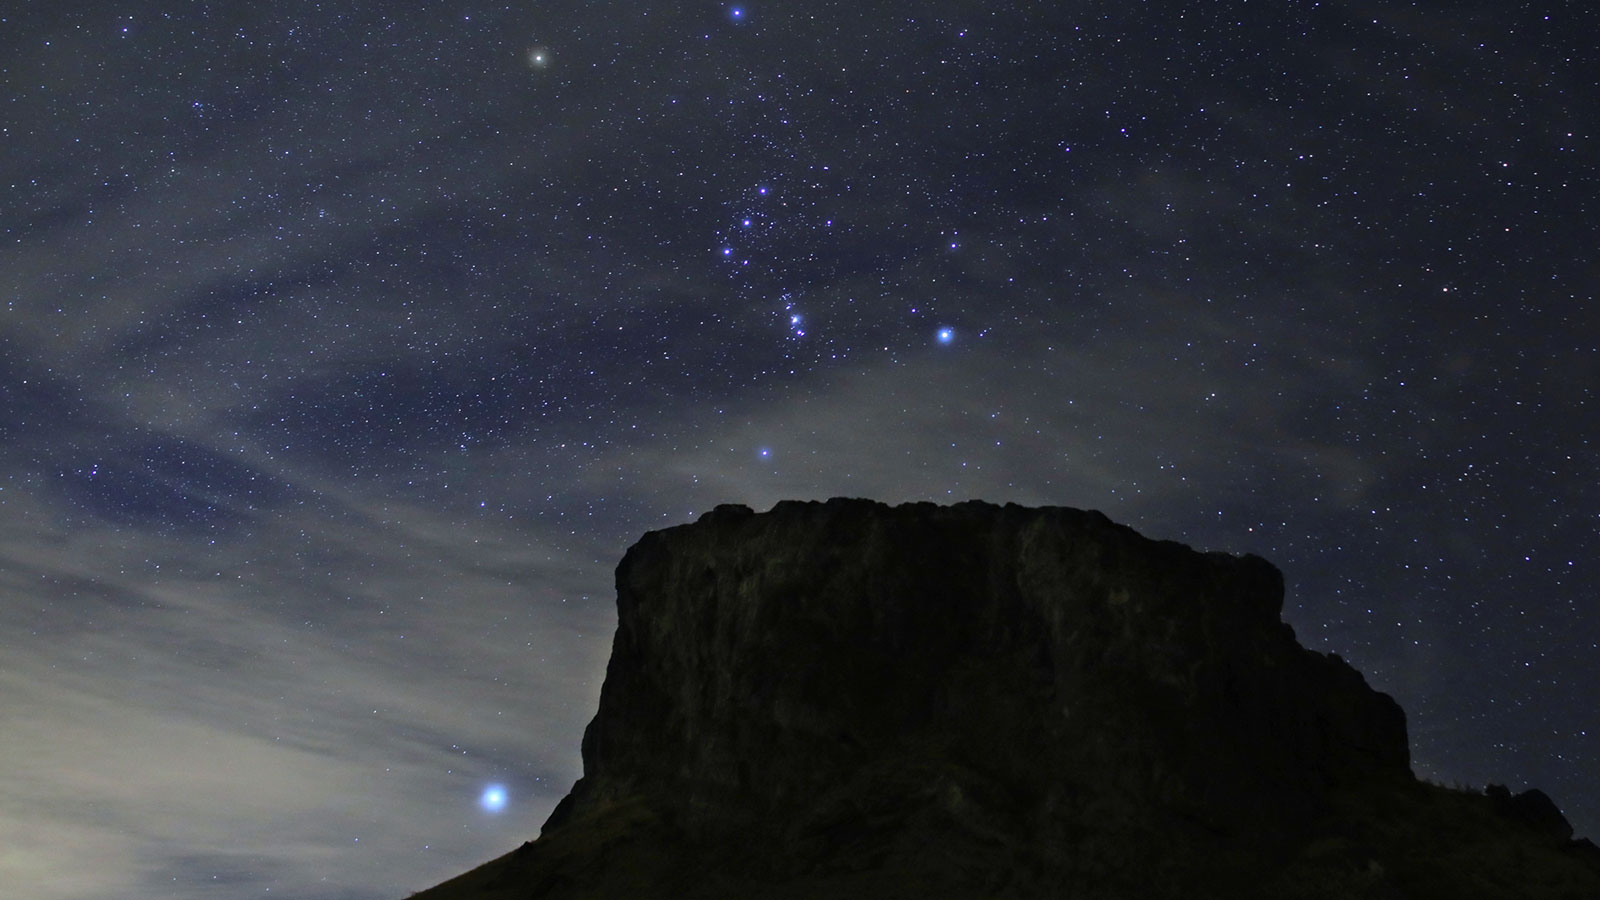 slide 1 - The bright contellation Orion rises above a flat top mesa in the southwestern desert.